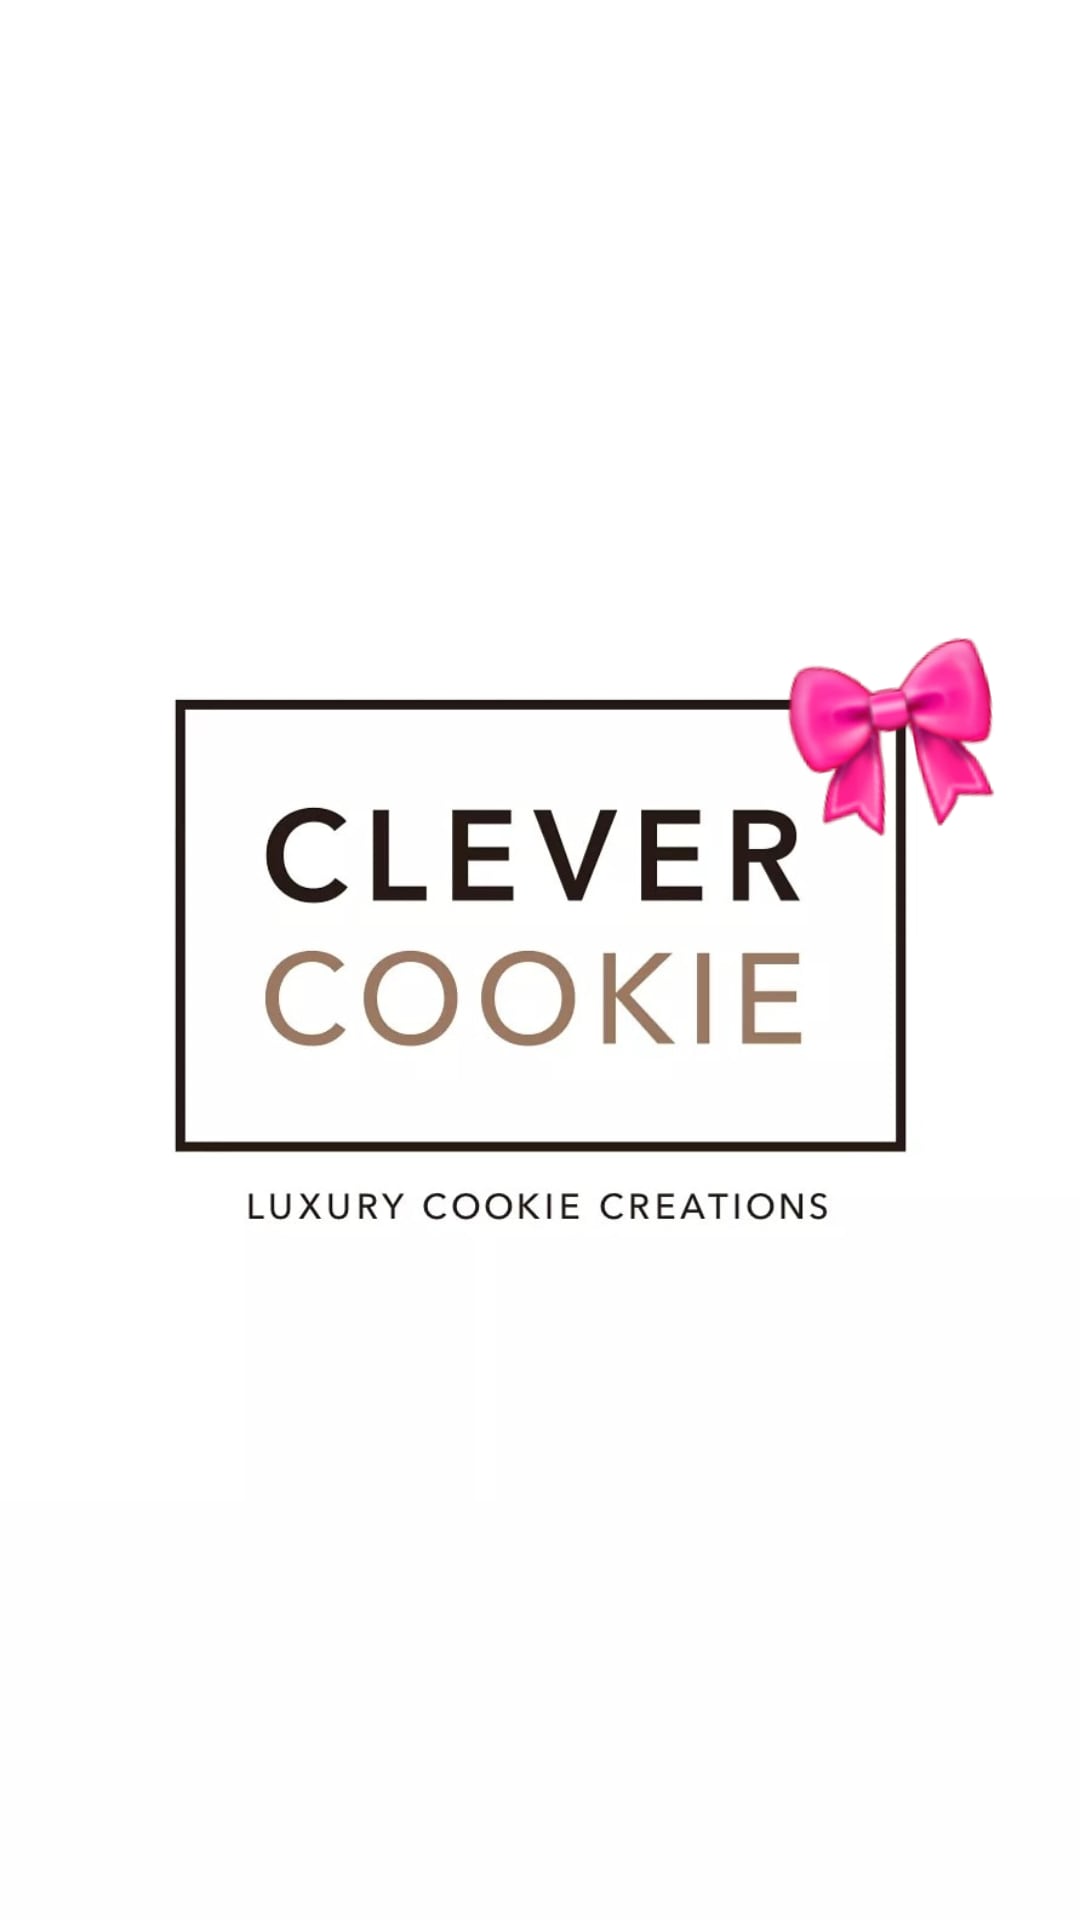 Clever Cookie Gift Voucher